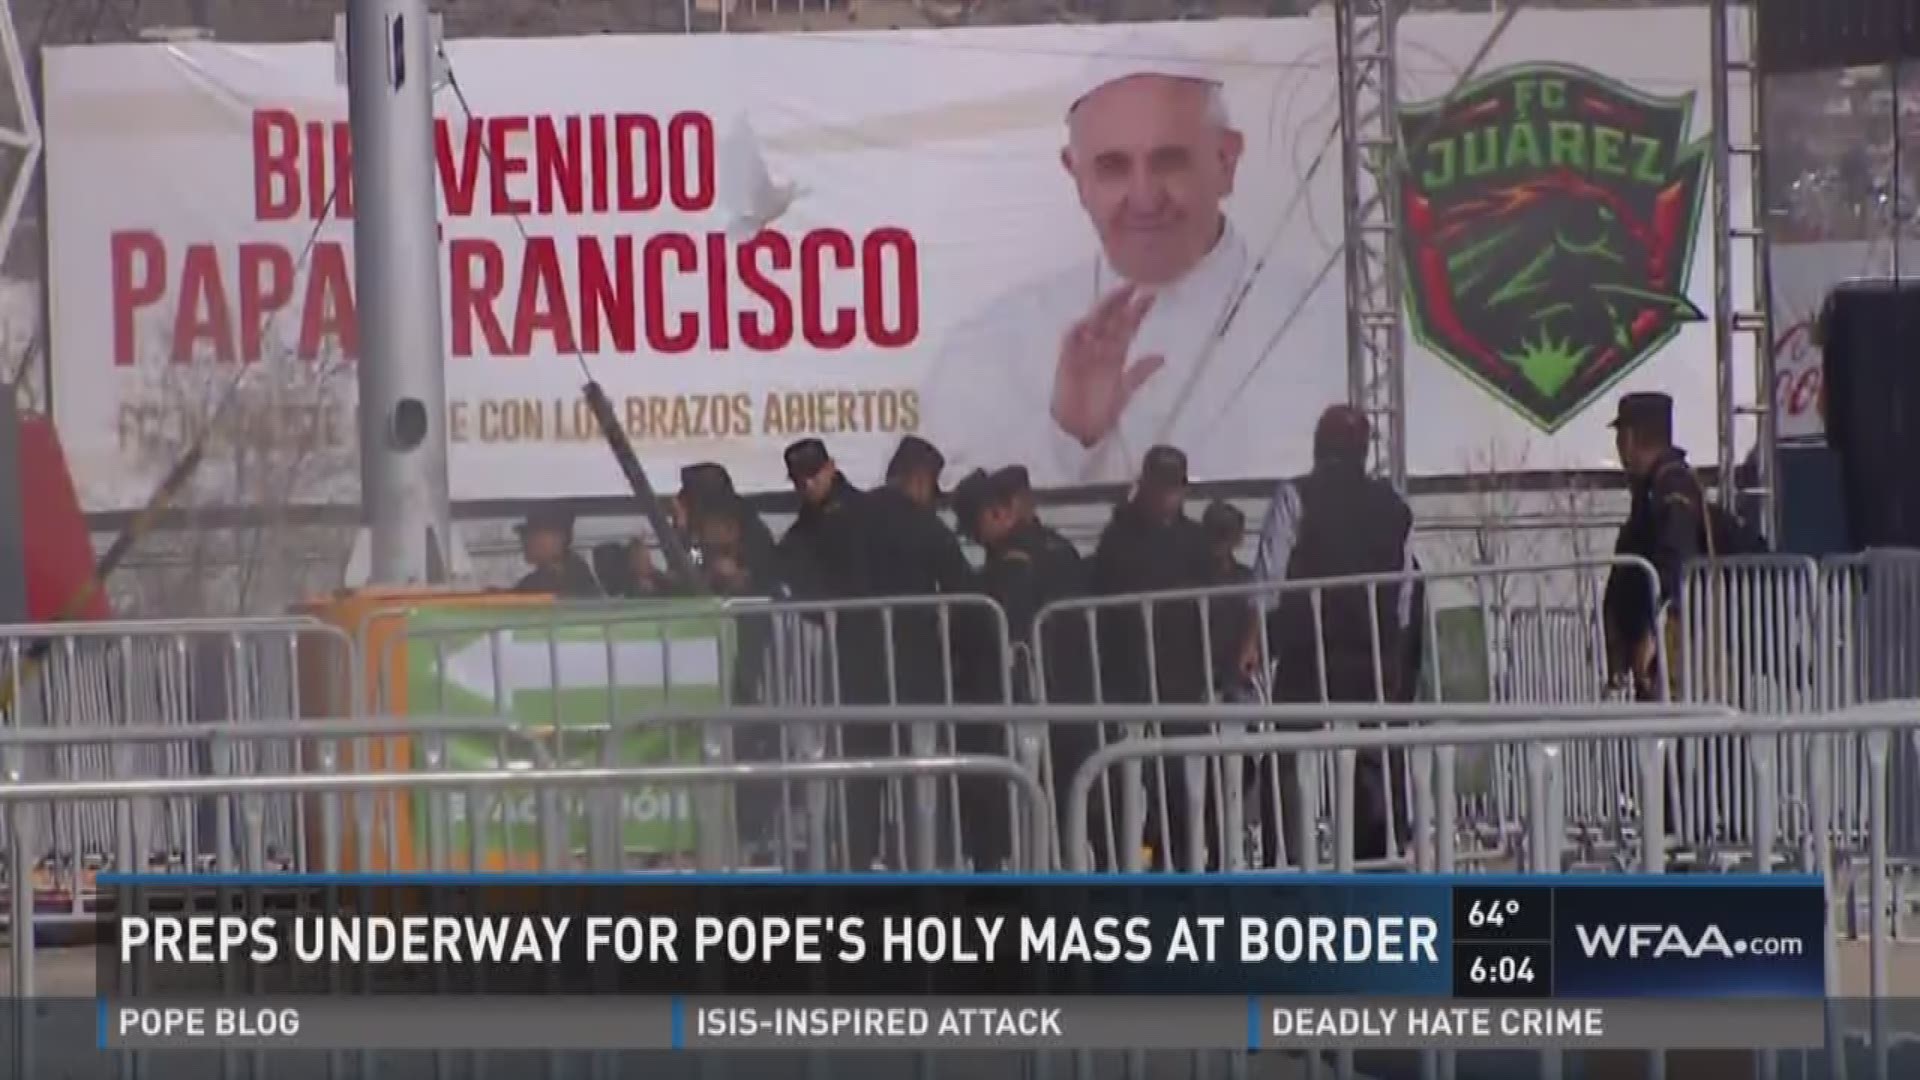 The Mexican border city is making final preparations for an outdoor mass with the Roman Catholic leader.